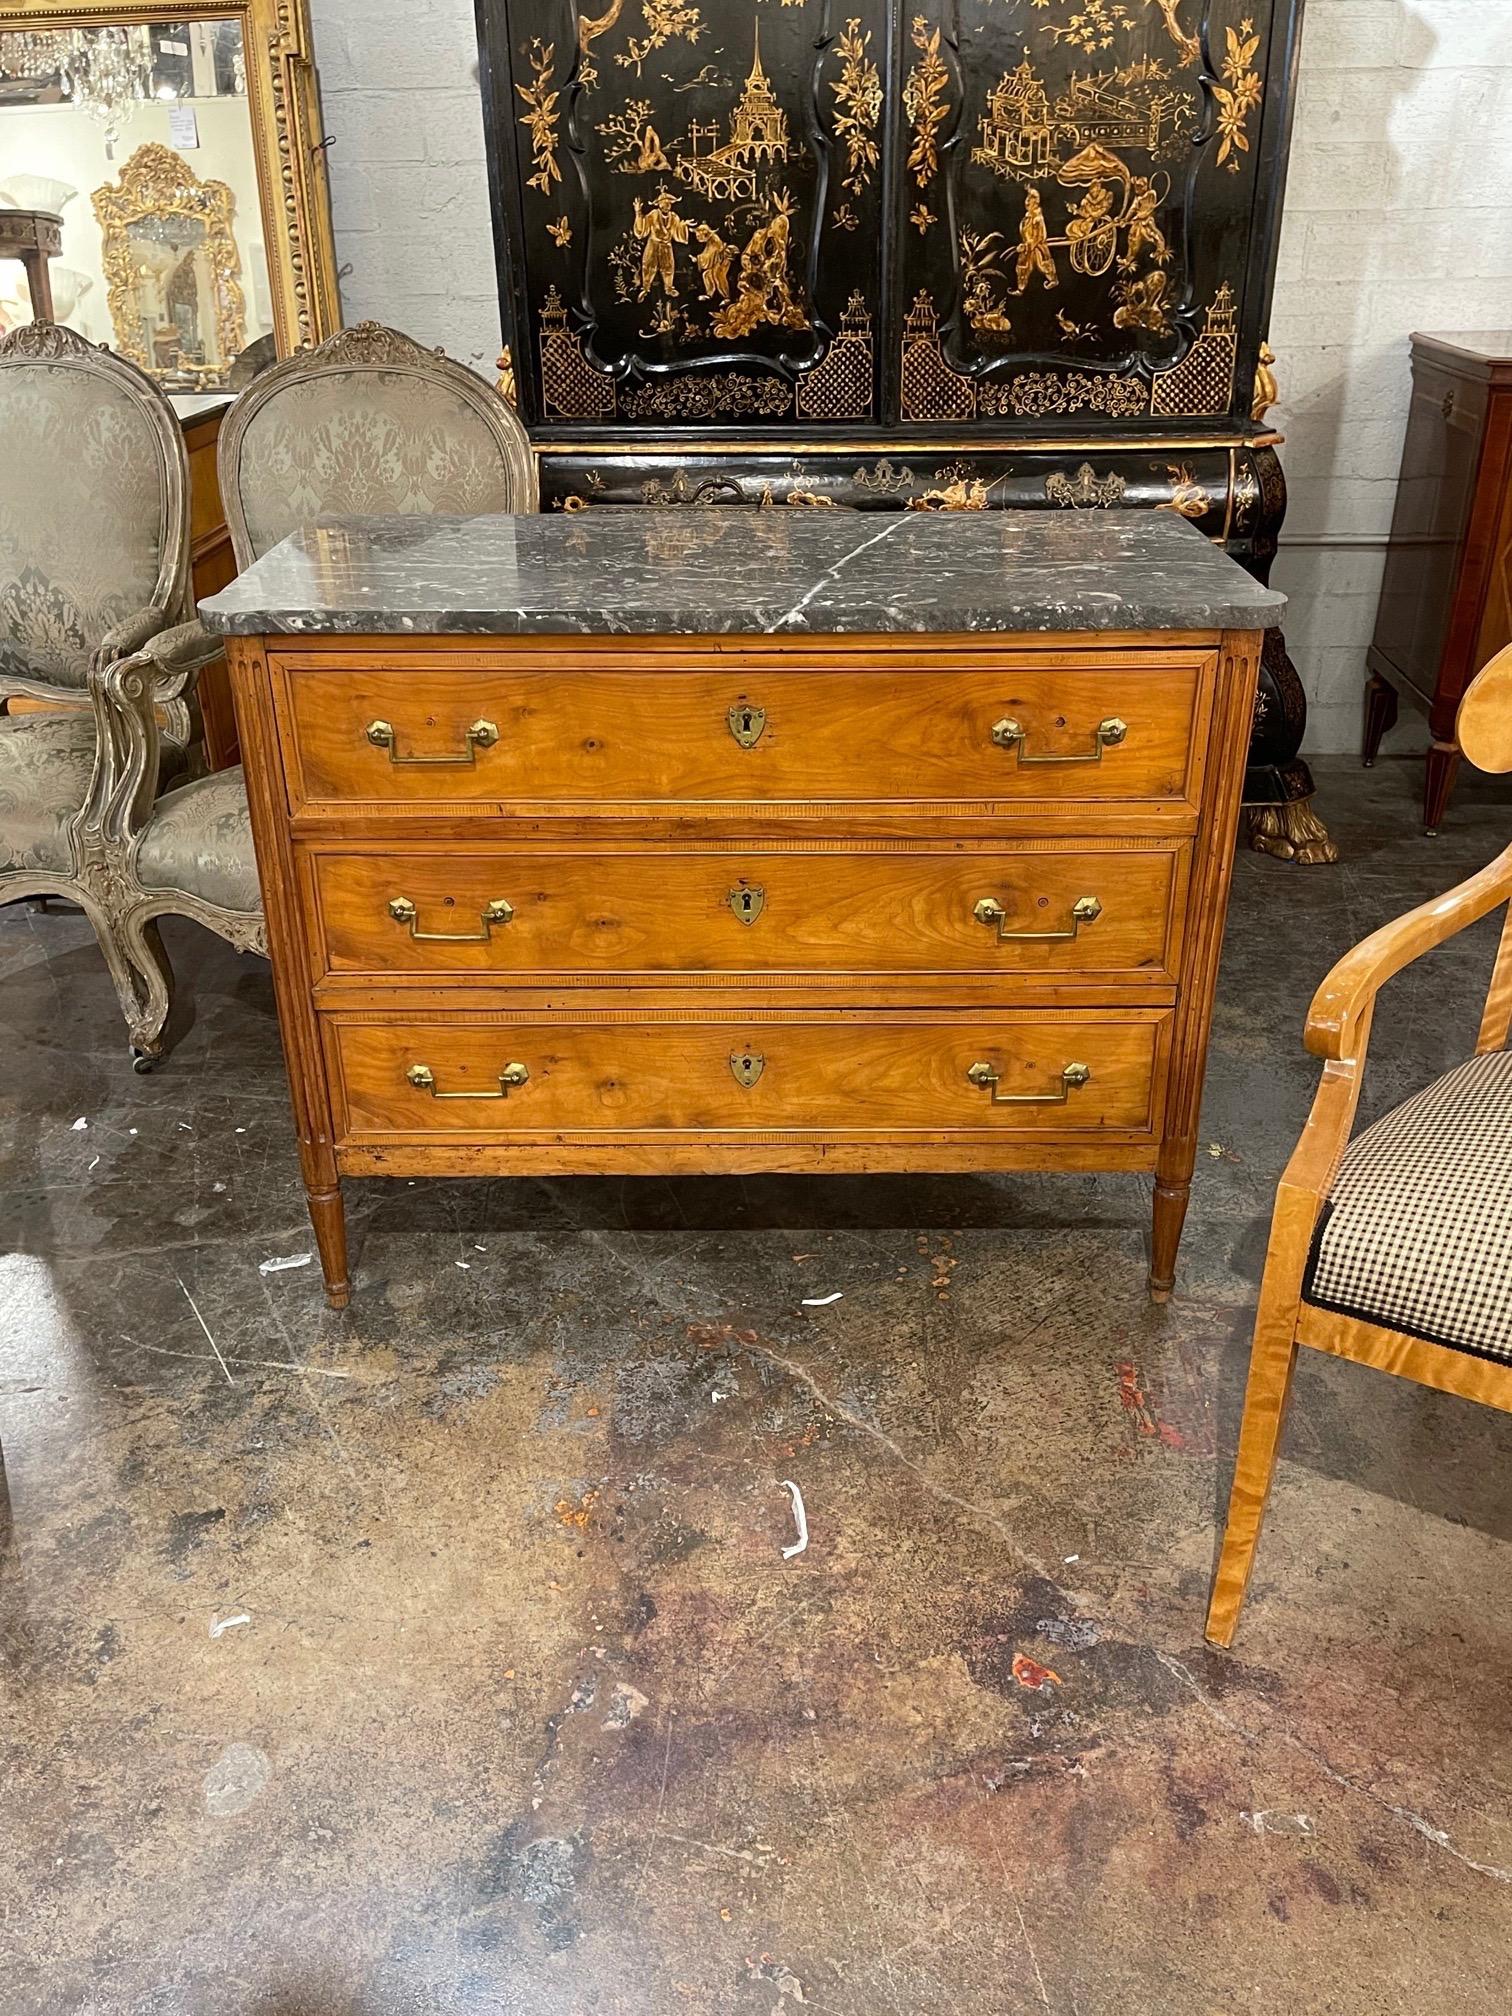 Handsome 19th century French Directoire walnut commode with a marble top. This piece has a beautiful finish and nice brass hardware as well. A classic chest for a variety of decors!